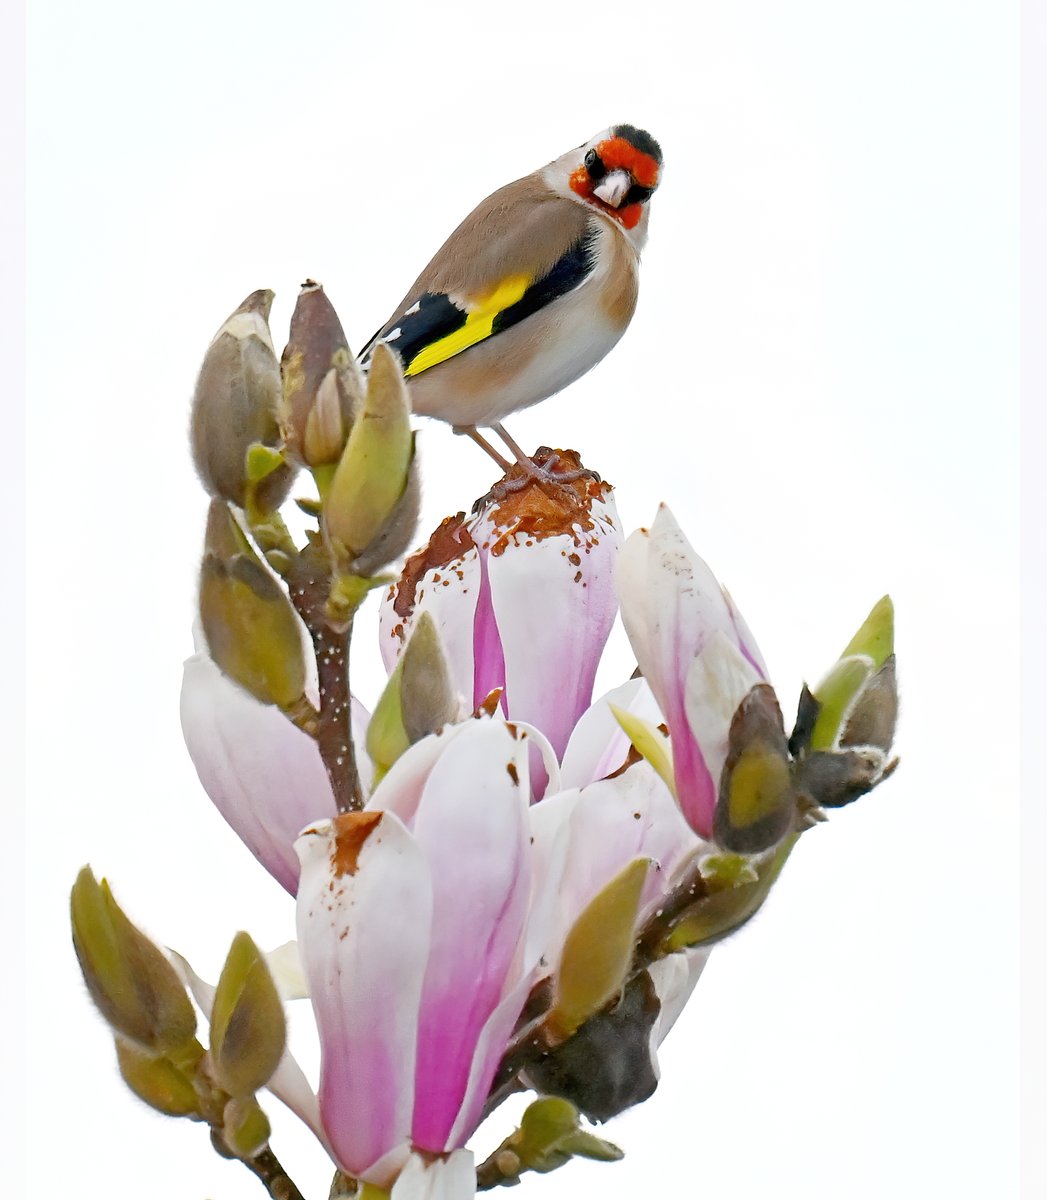 Goldfinch on a Magnolia bloom, giving me the look! 😮😁 Taken recently in my Somerset village. 🐦